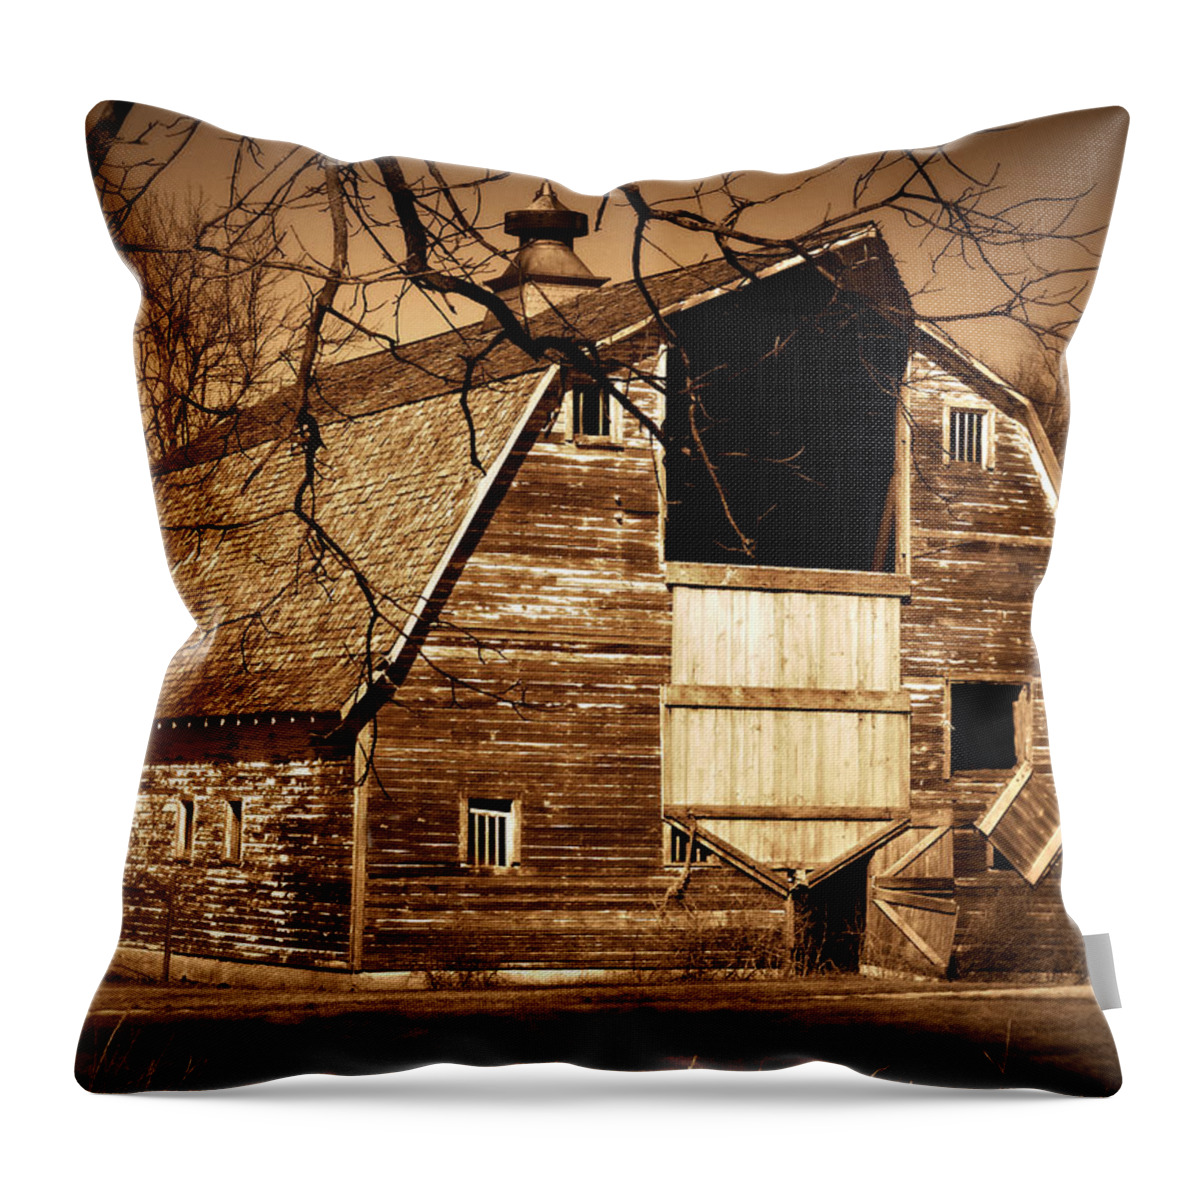 Barn Throw Pillow featuring the photograph In Need by Julie Hamilton